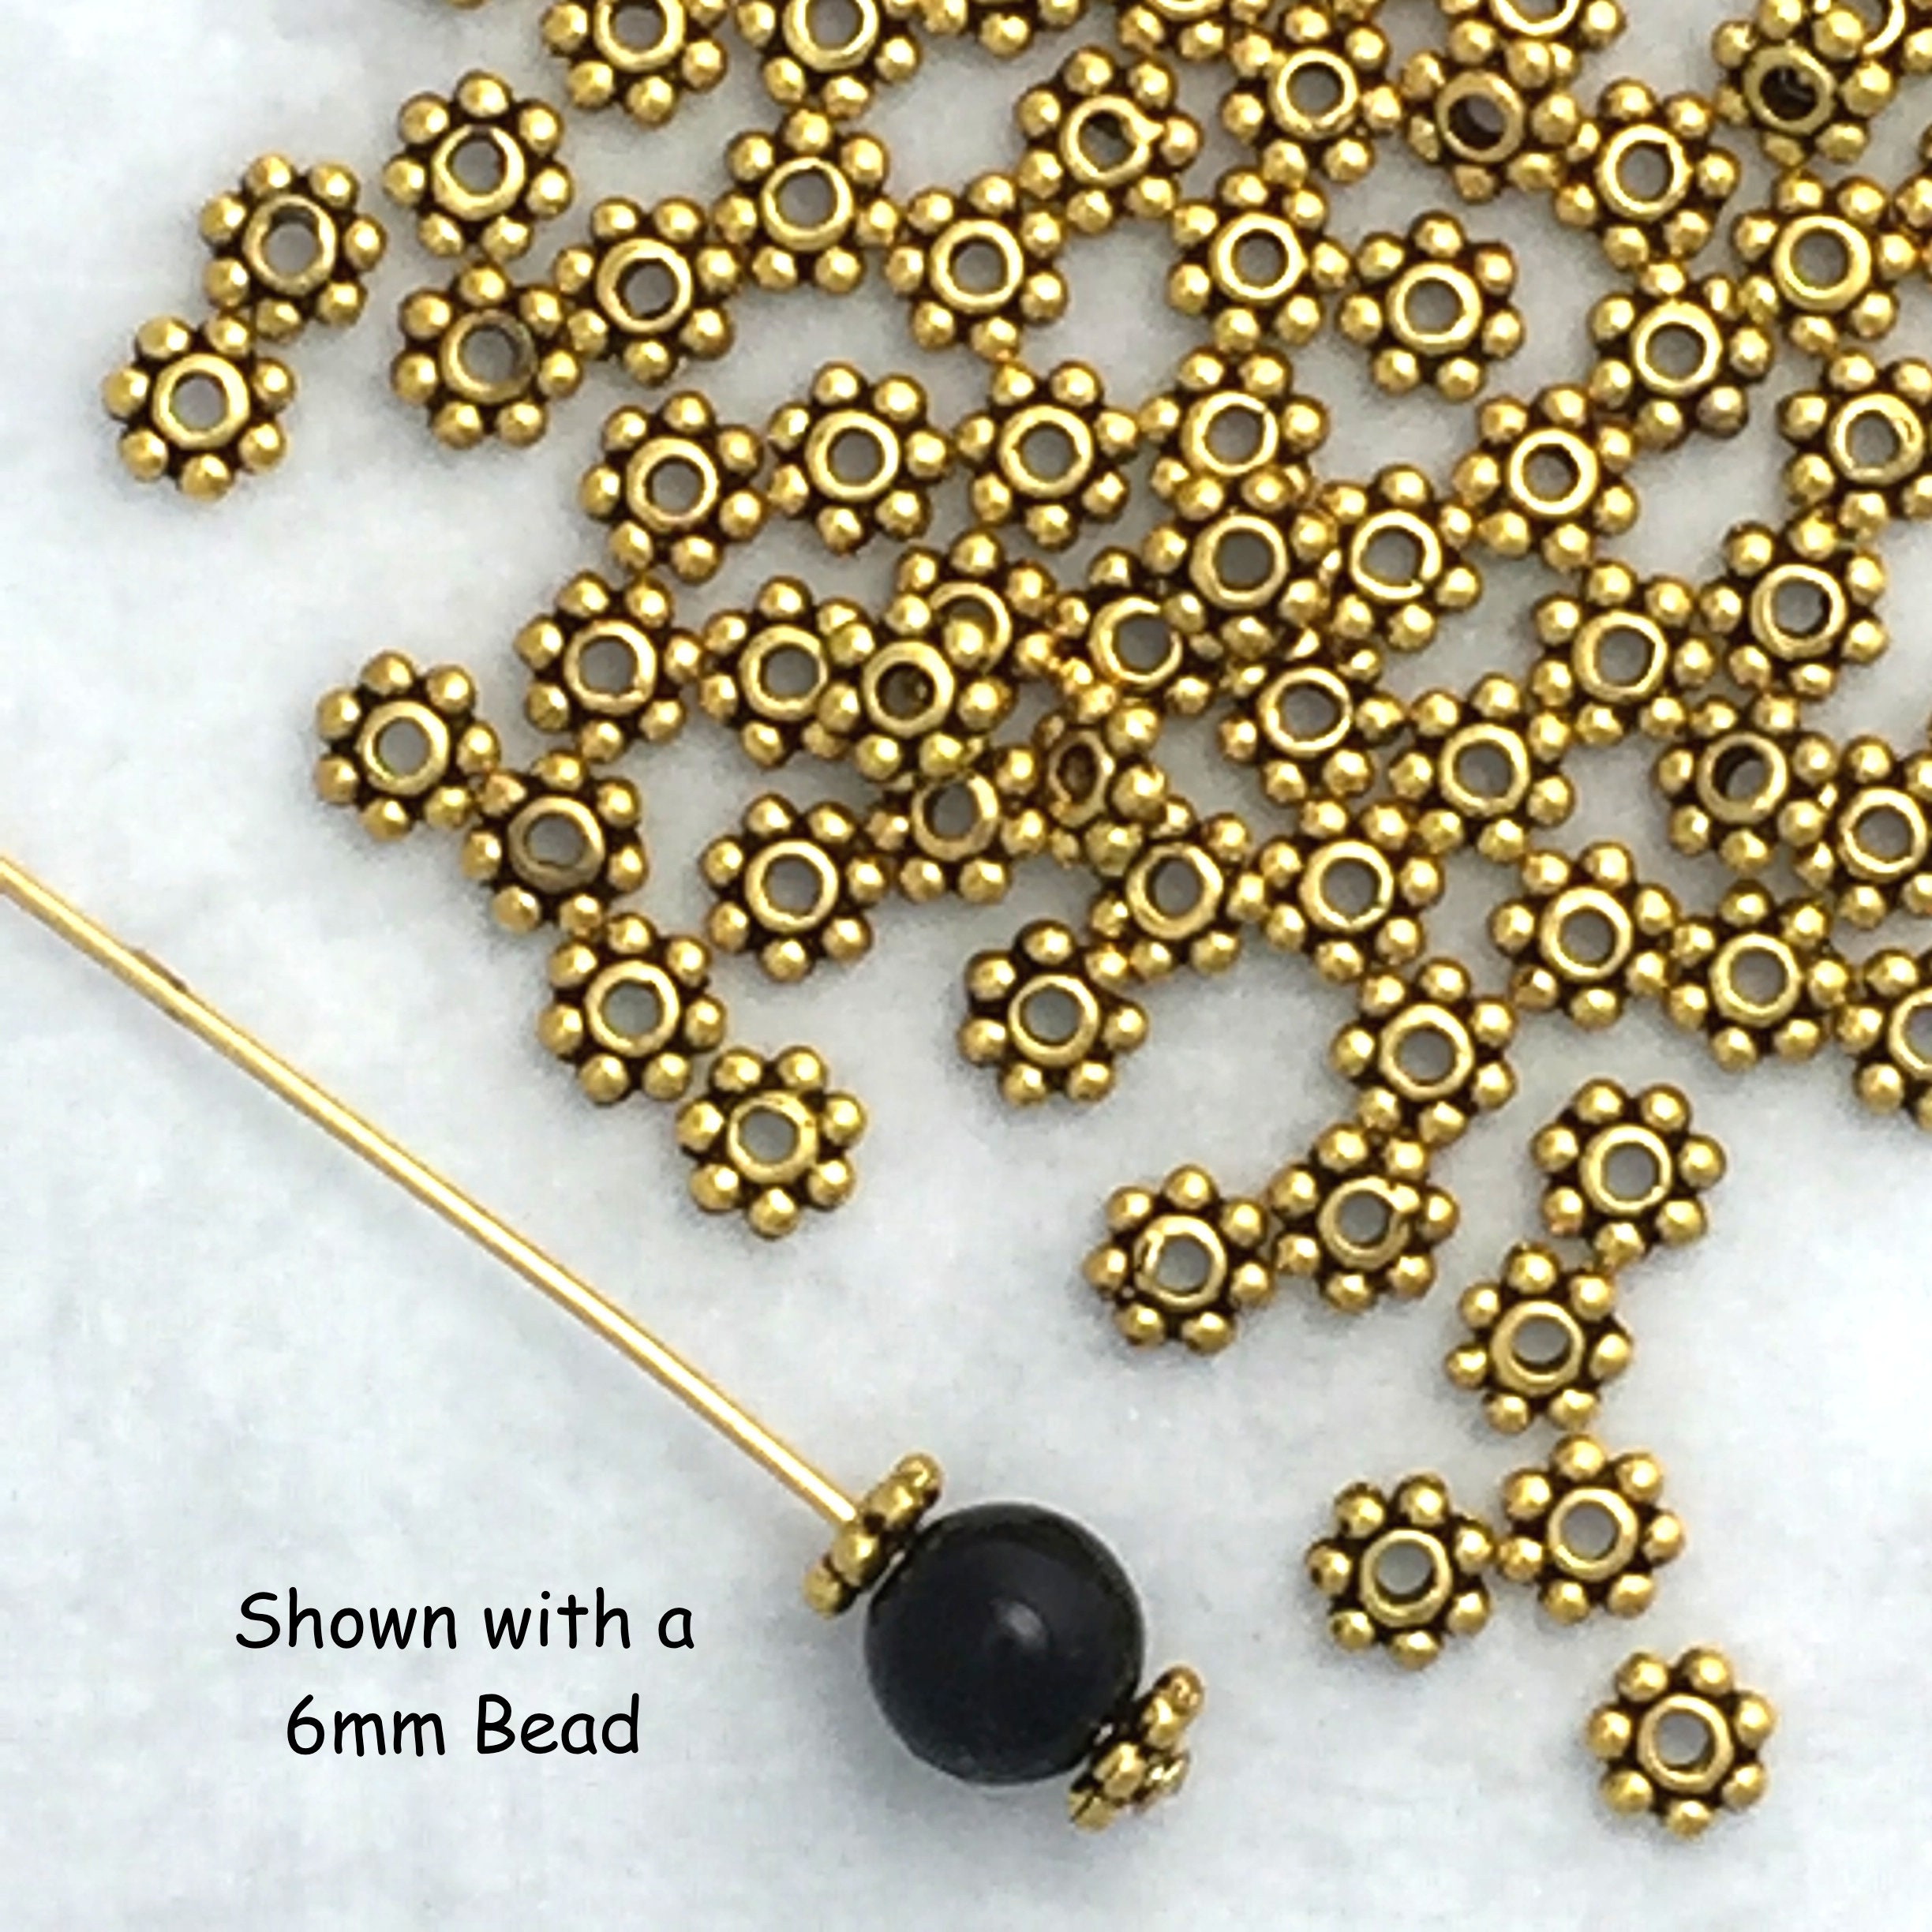 100 Gold Beads - 4mm Gold Ball Beads - Gold Plated Round Beads - Spacer  Beads - Gold Metal Beads (FS92)